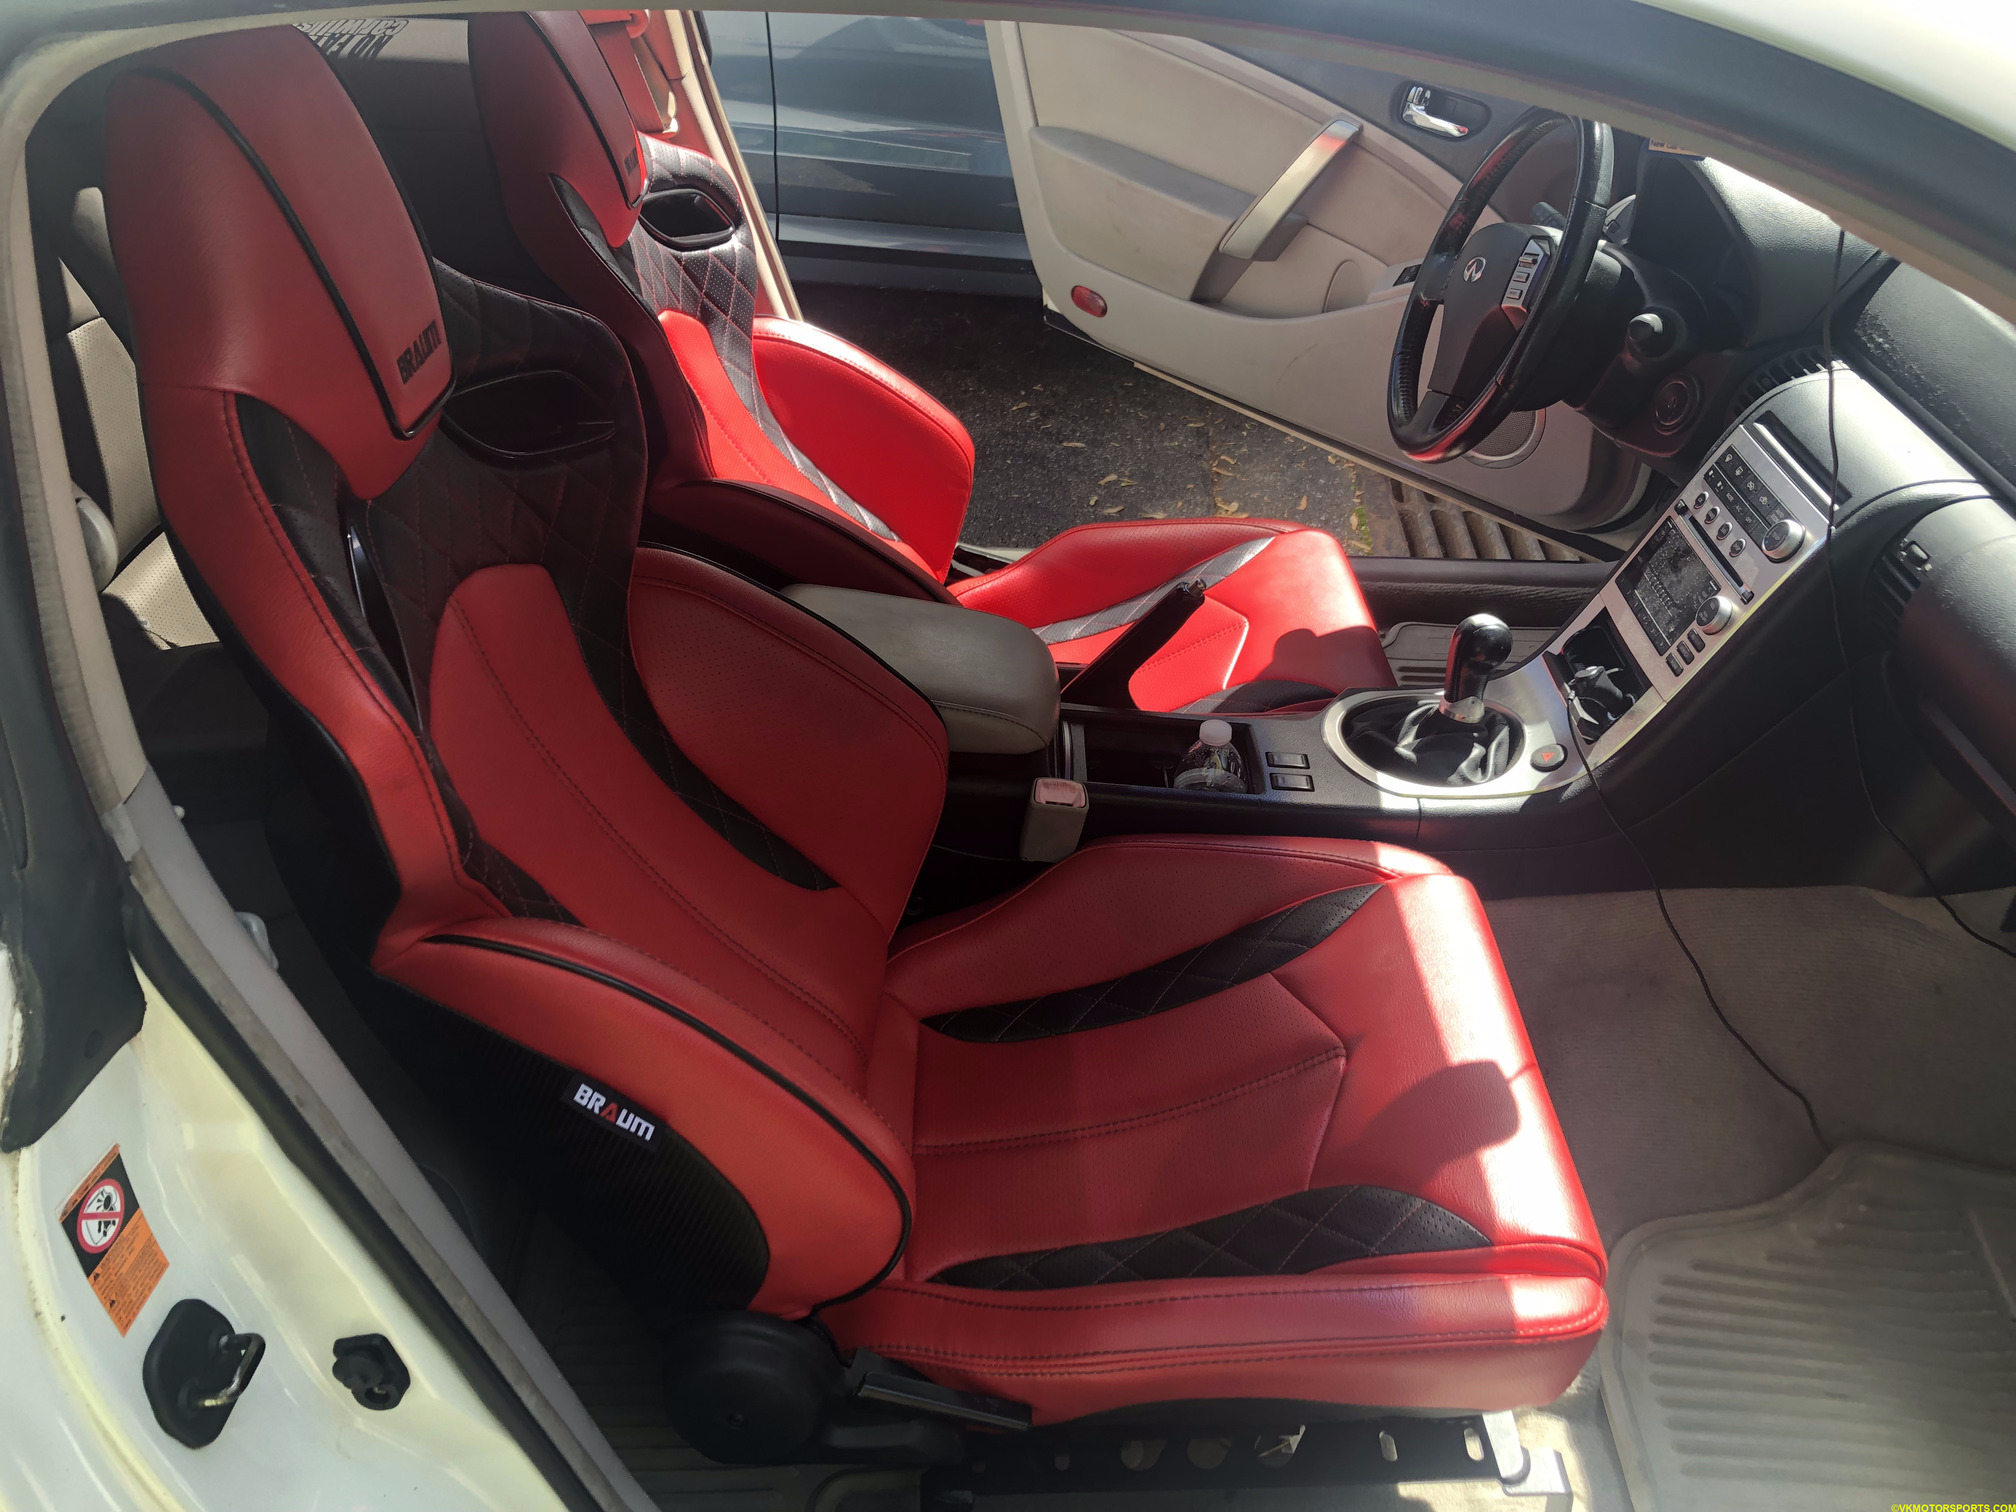 Figure 12. View of Braum Racing seats installed in a G35 coupe